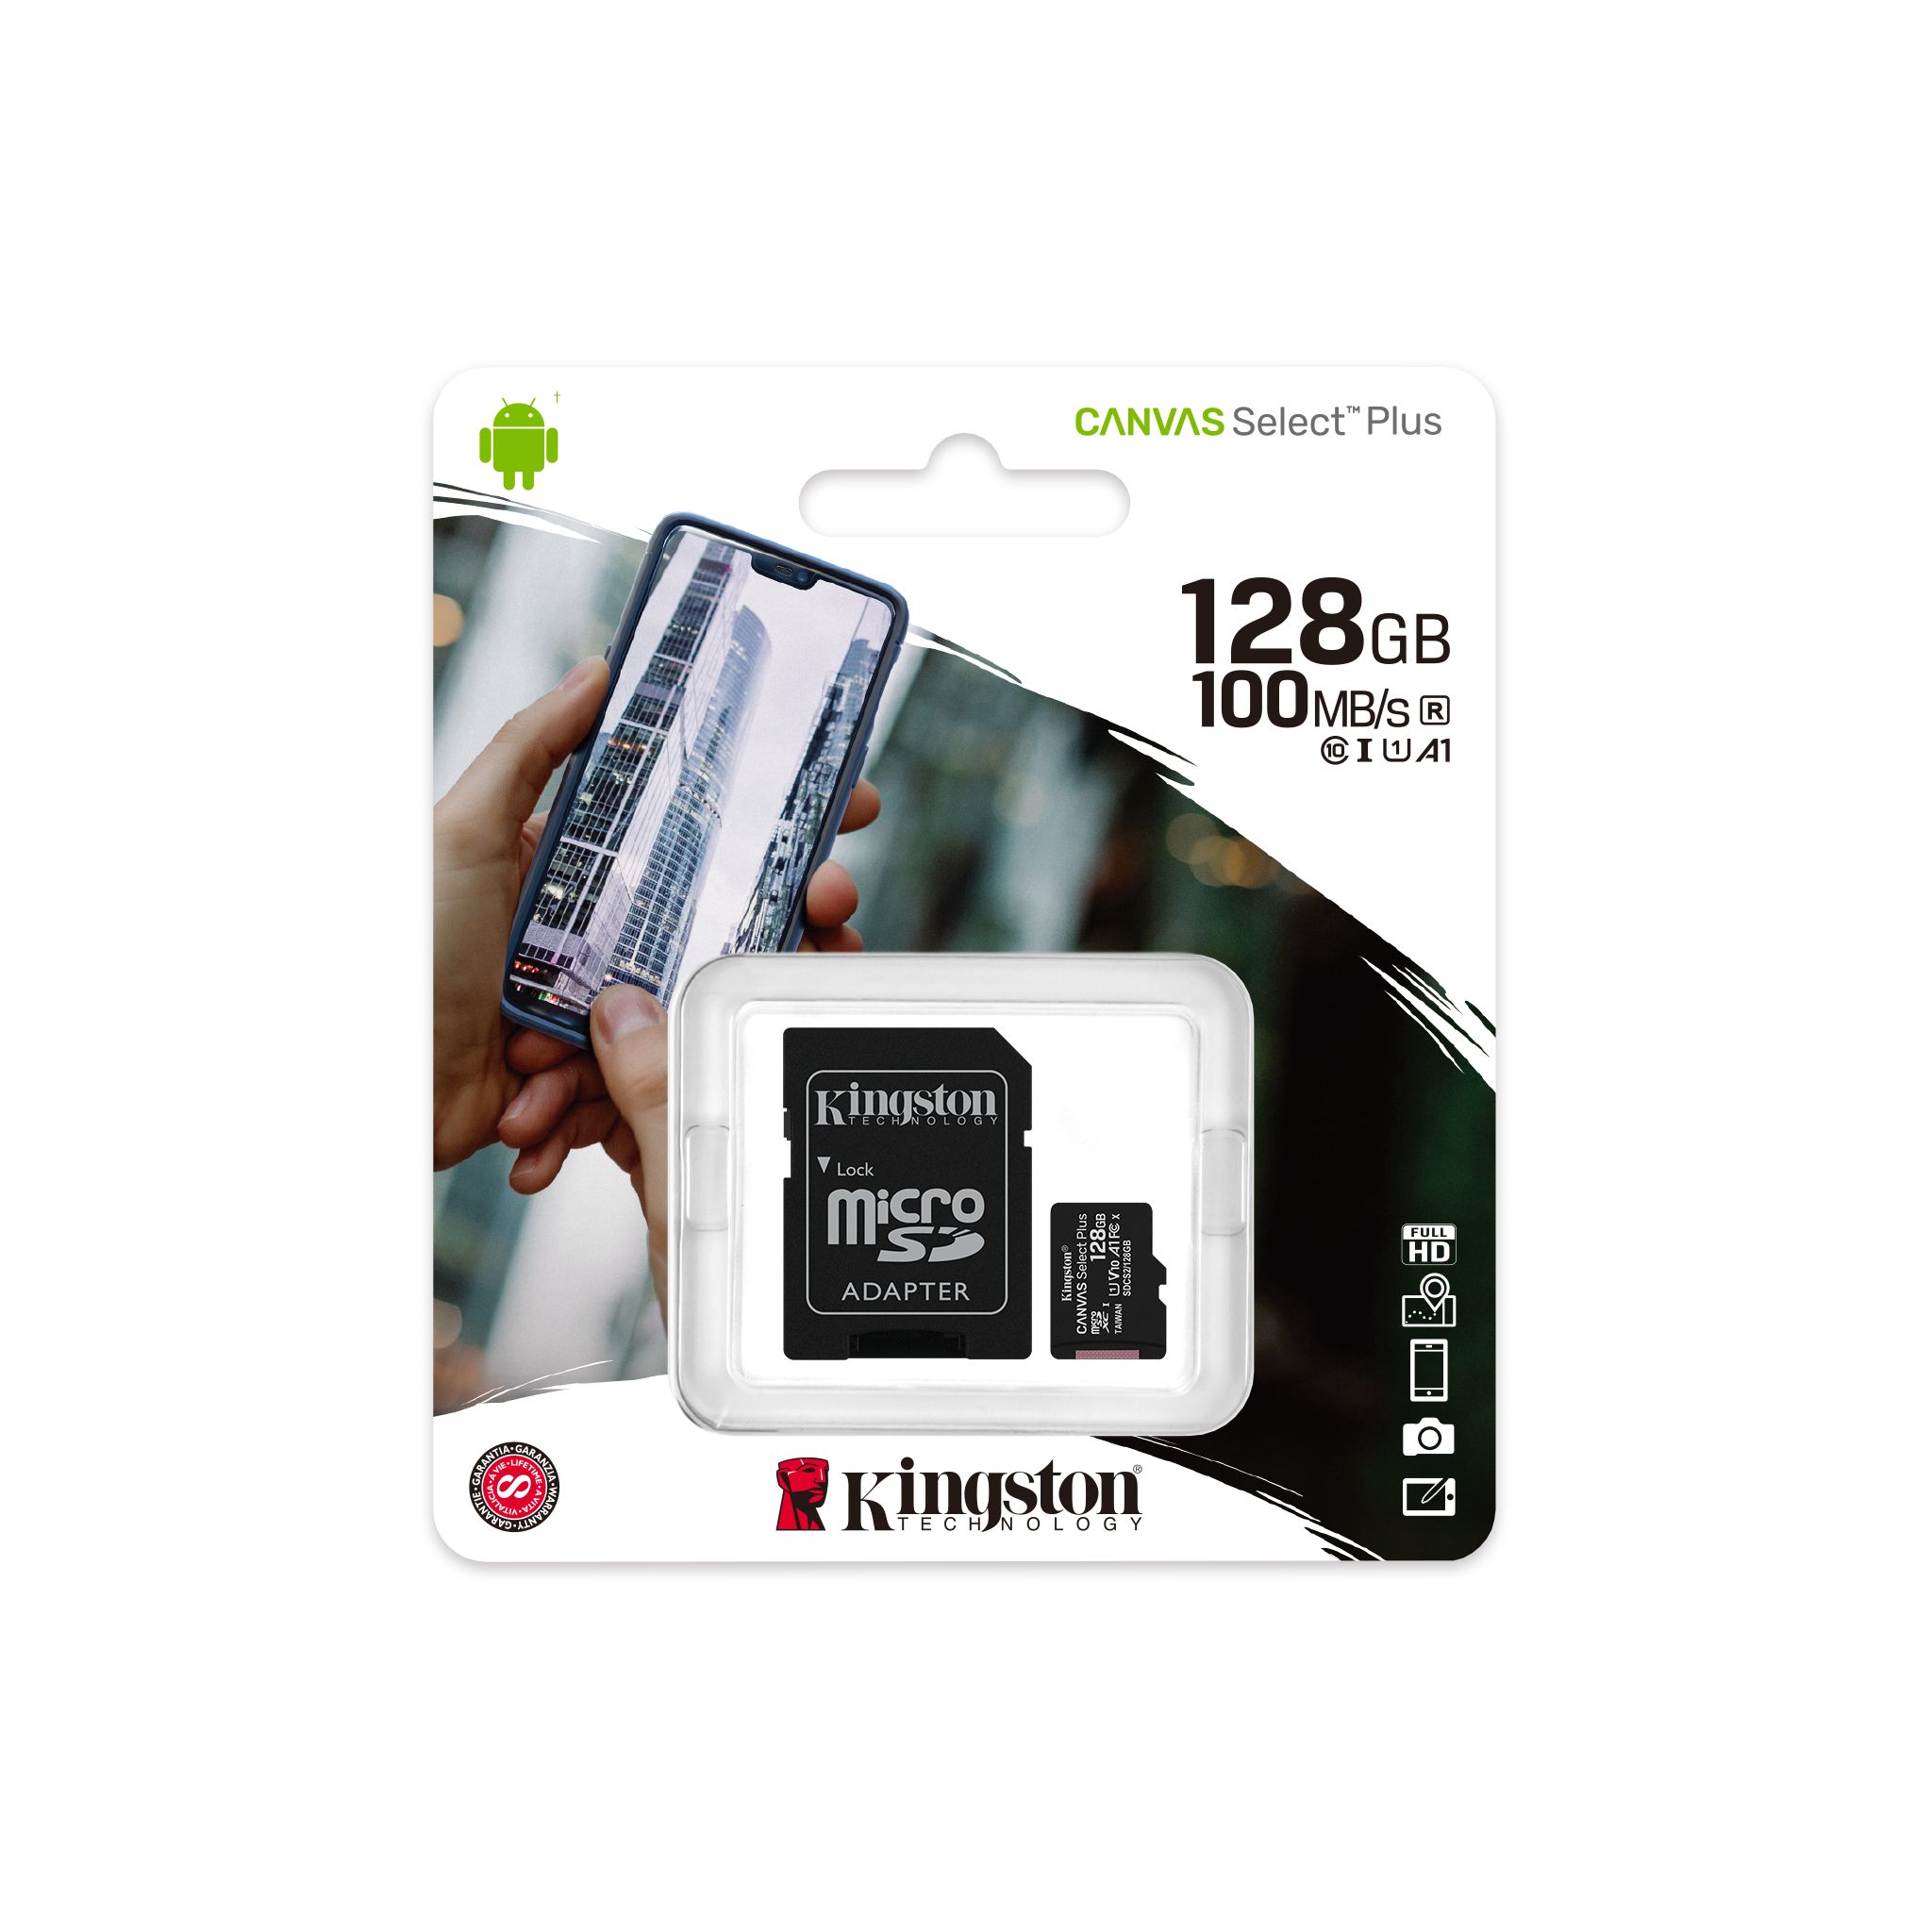 100MBs Works with Kingston MicroSDXC Canvas Select Plus Card Verified by SanFlash. Kingston 128GB Dell XPS 13 9380 